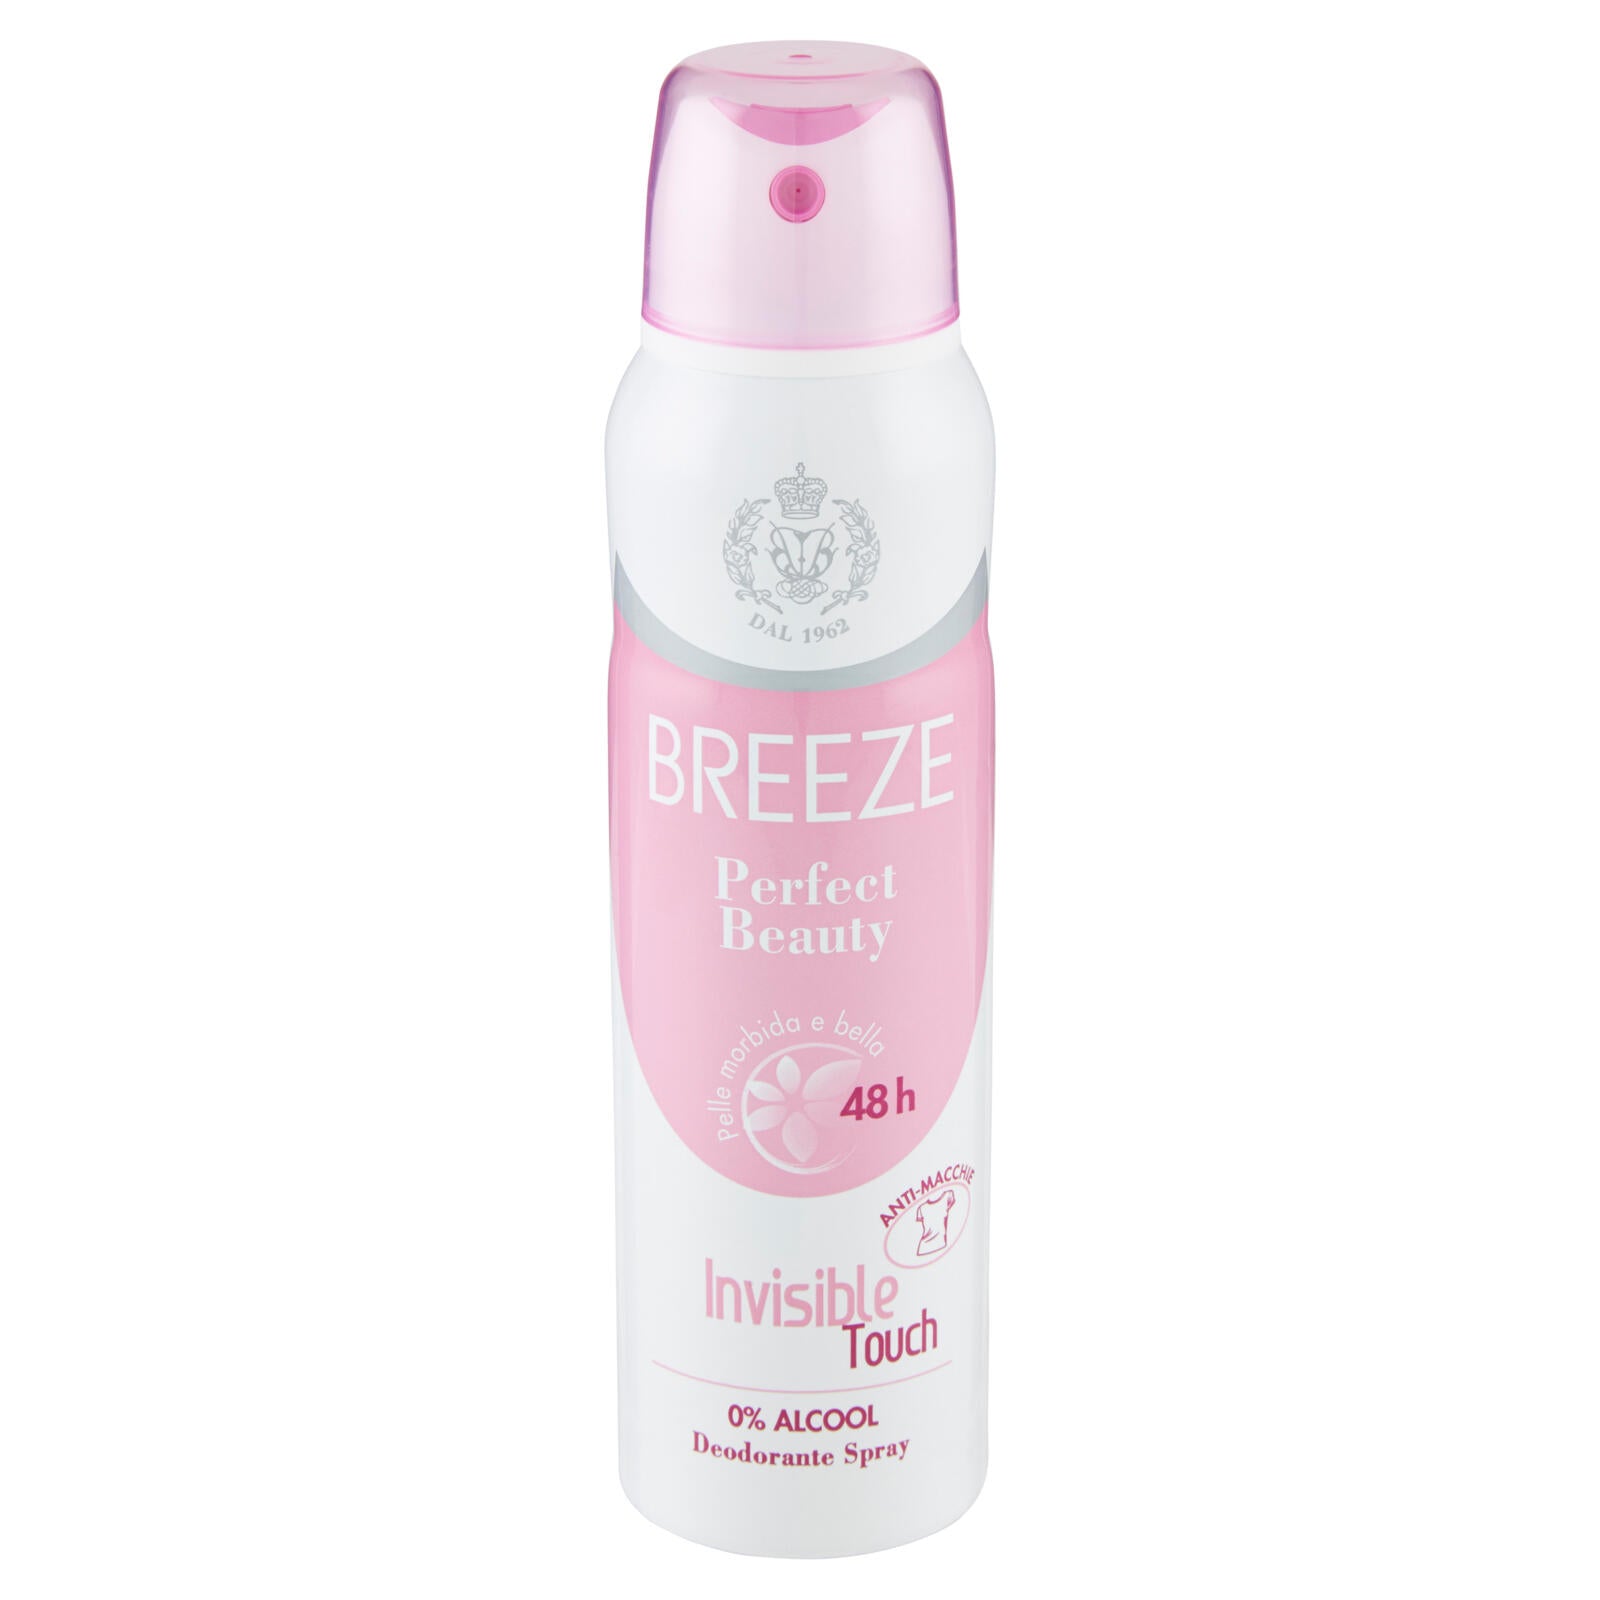 Breeze Perfect beauty invisible touch 150 mL